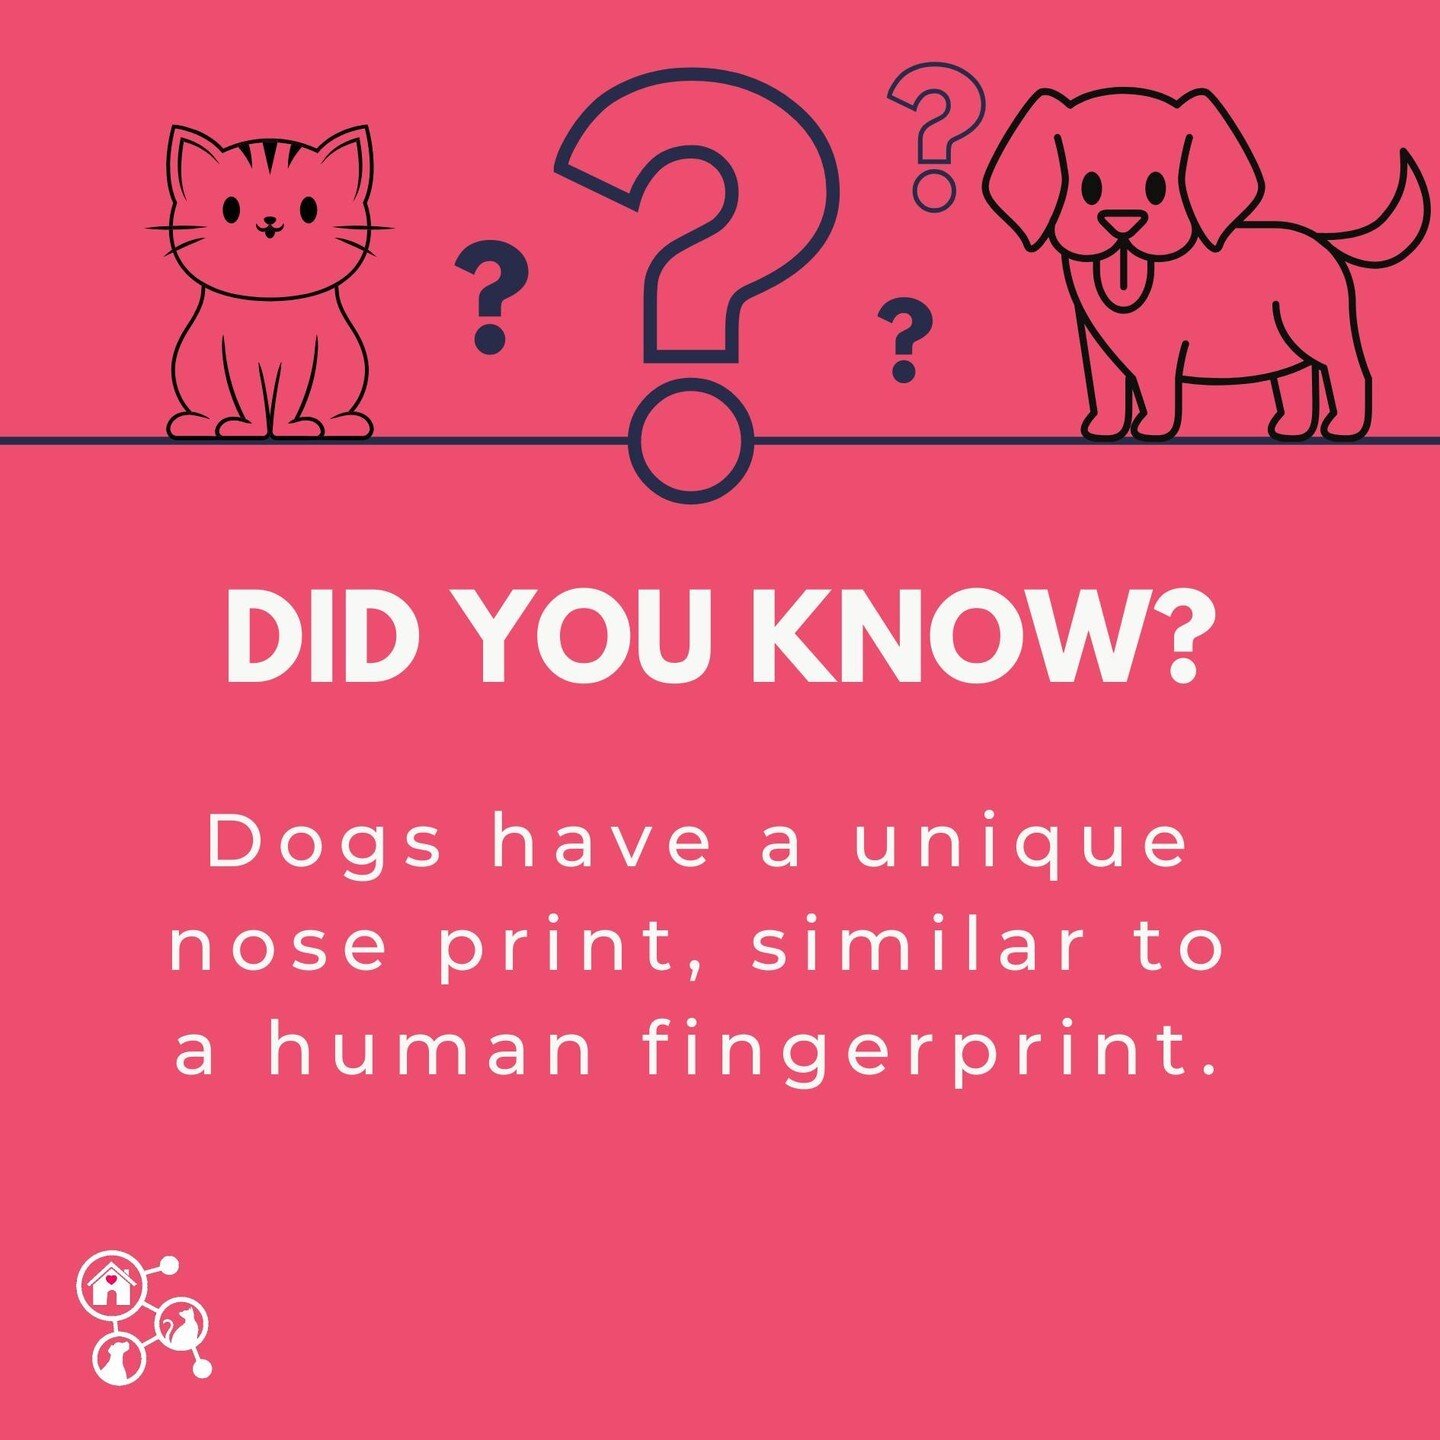 🐾 Hey dog lovers, did you know our furry friends have a nose-tastic superpower? 🐶✨ Each pup has a nose print as unique as a human fingerprint! 🐾👃

Next time you're snuggling with your canine companion, take a moment to appreciate that adorable sn